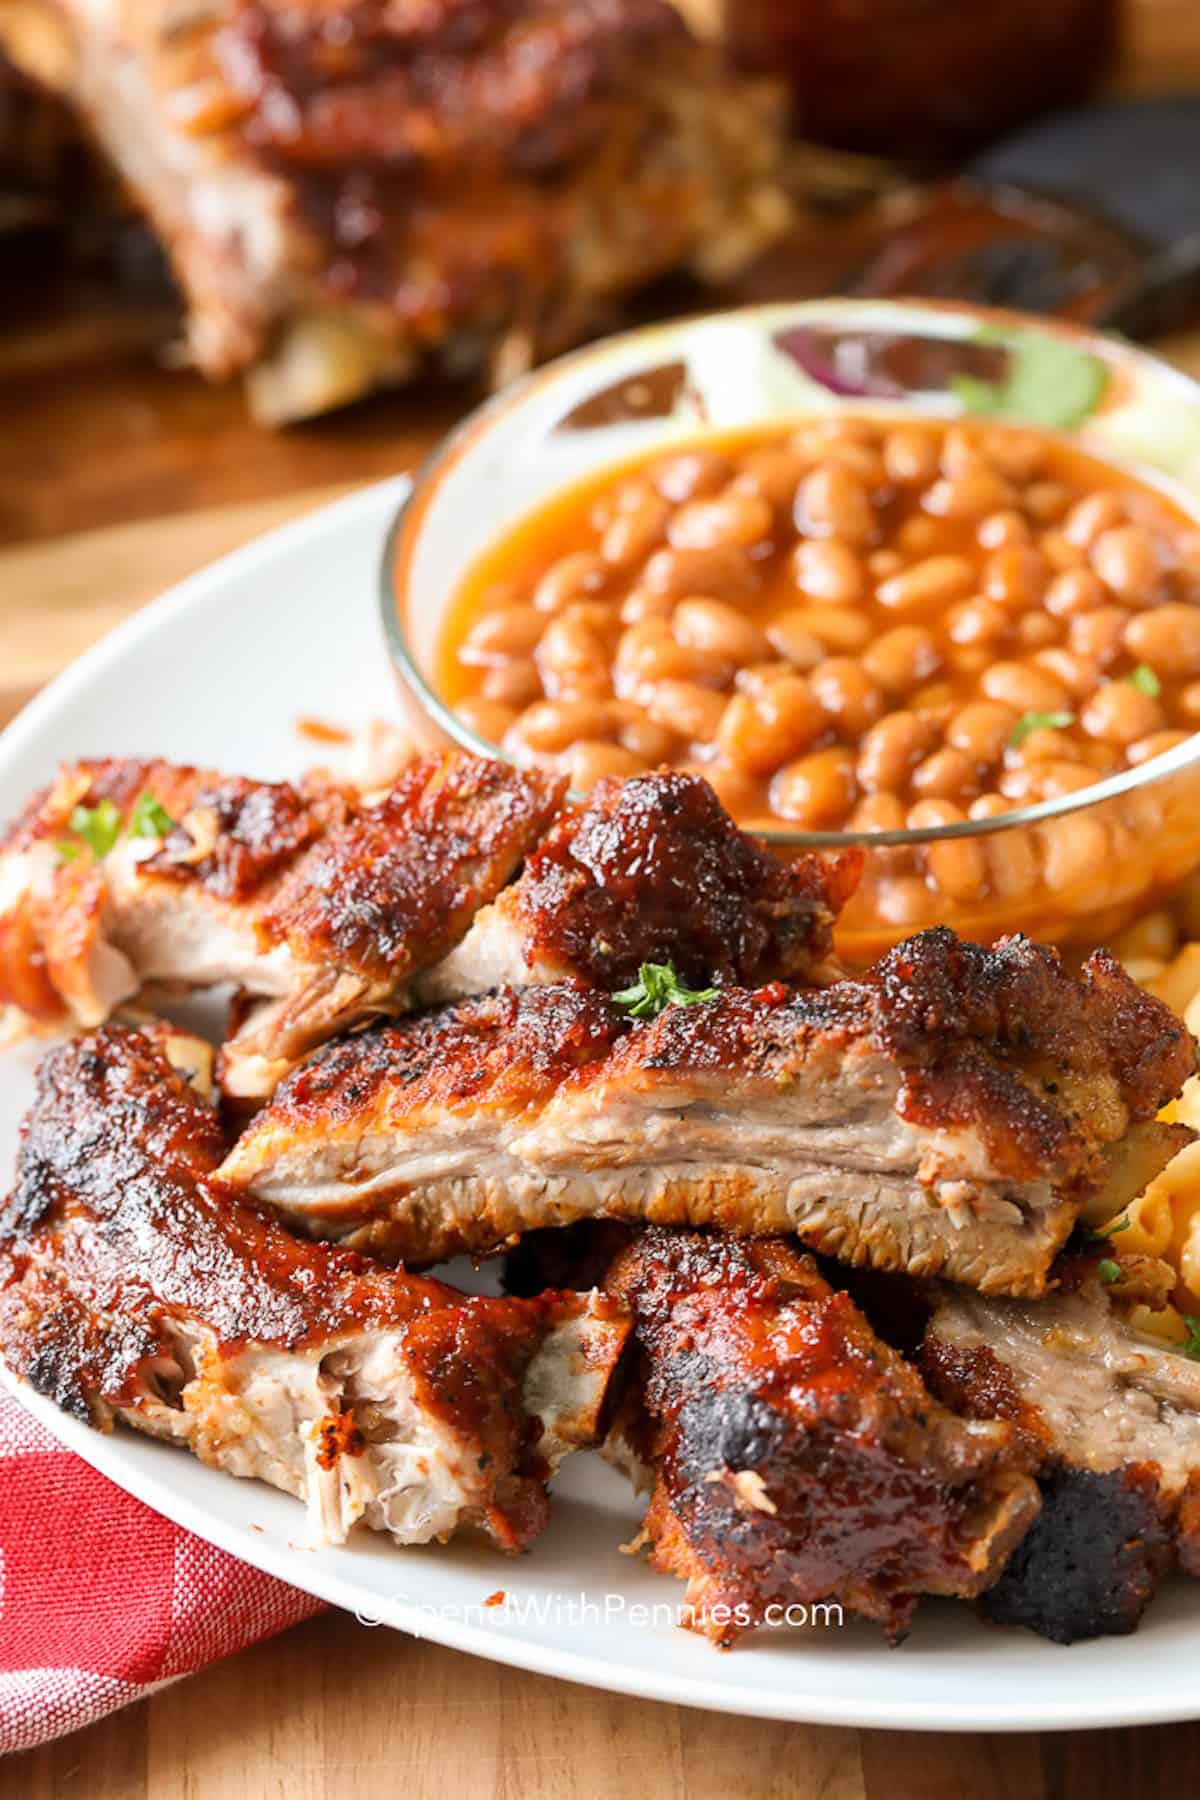 Barbecue Ribs served on a plate with baked beans